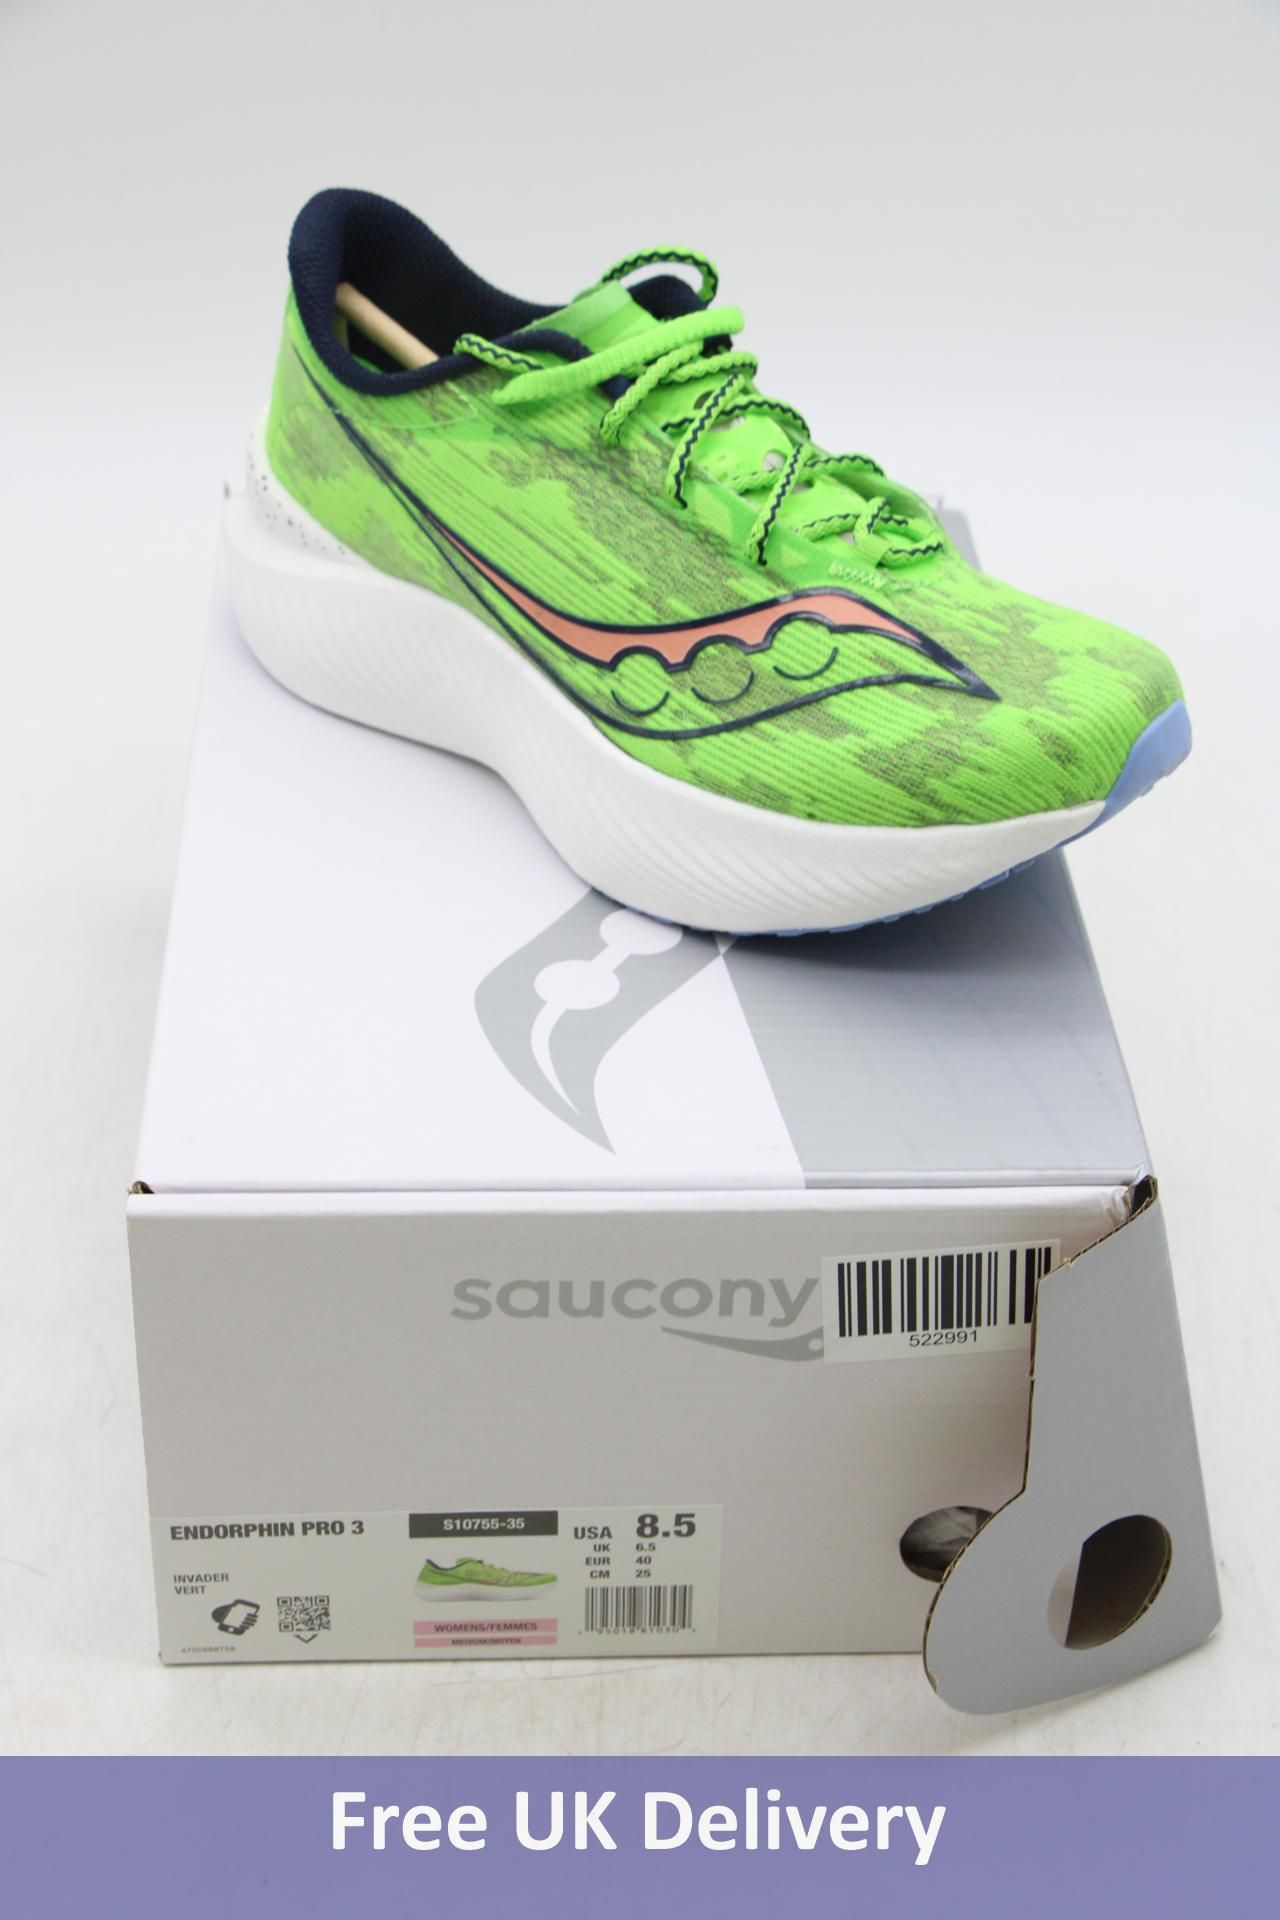 Saucony Endorphin Pro 3 Trainers, Invader Green/White, UK 6.5